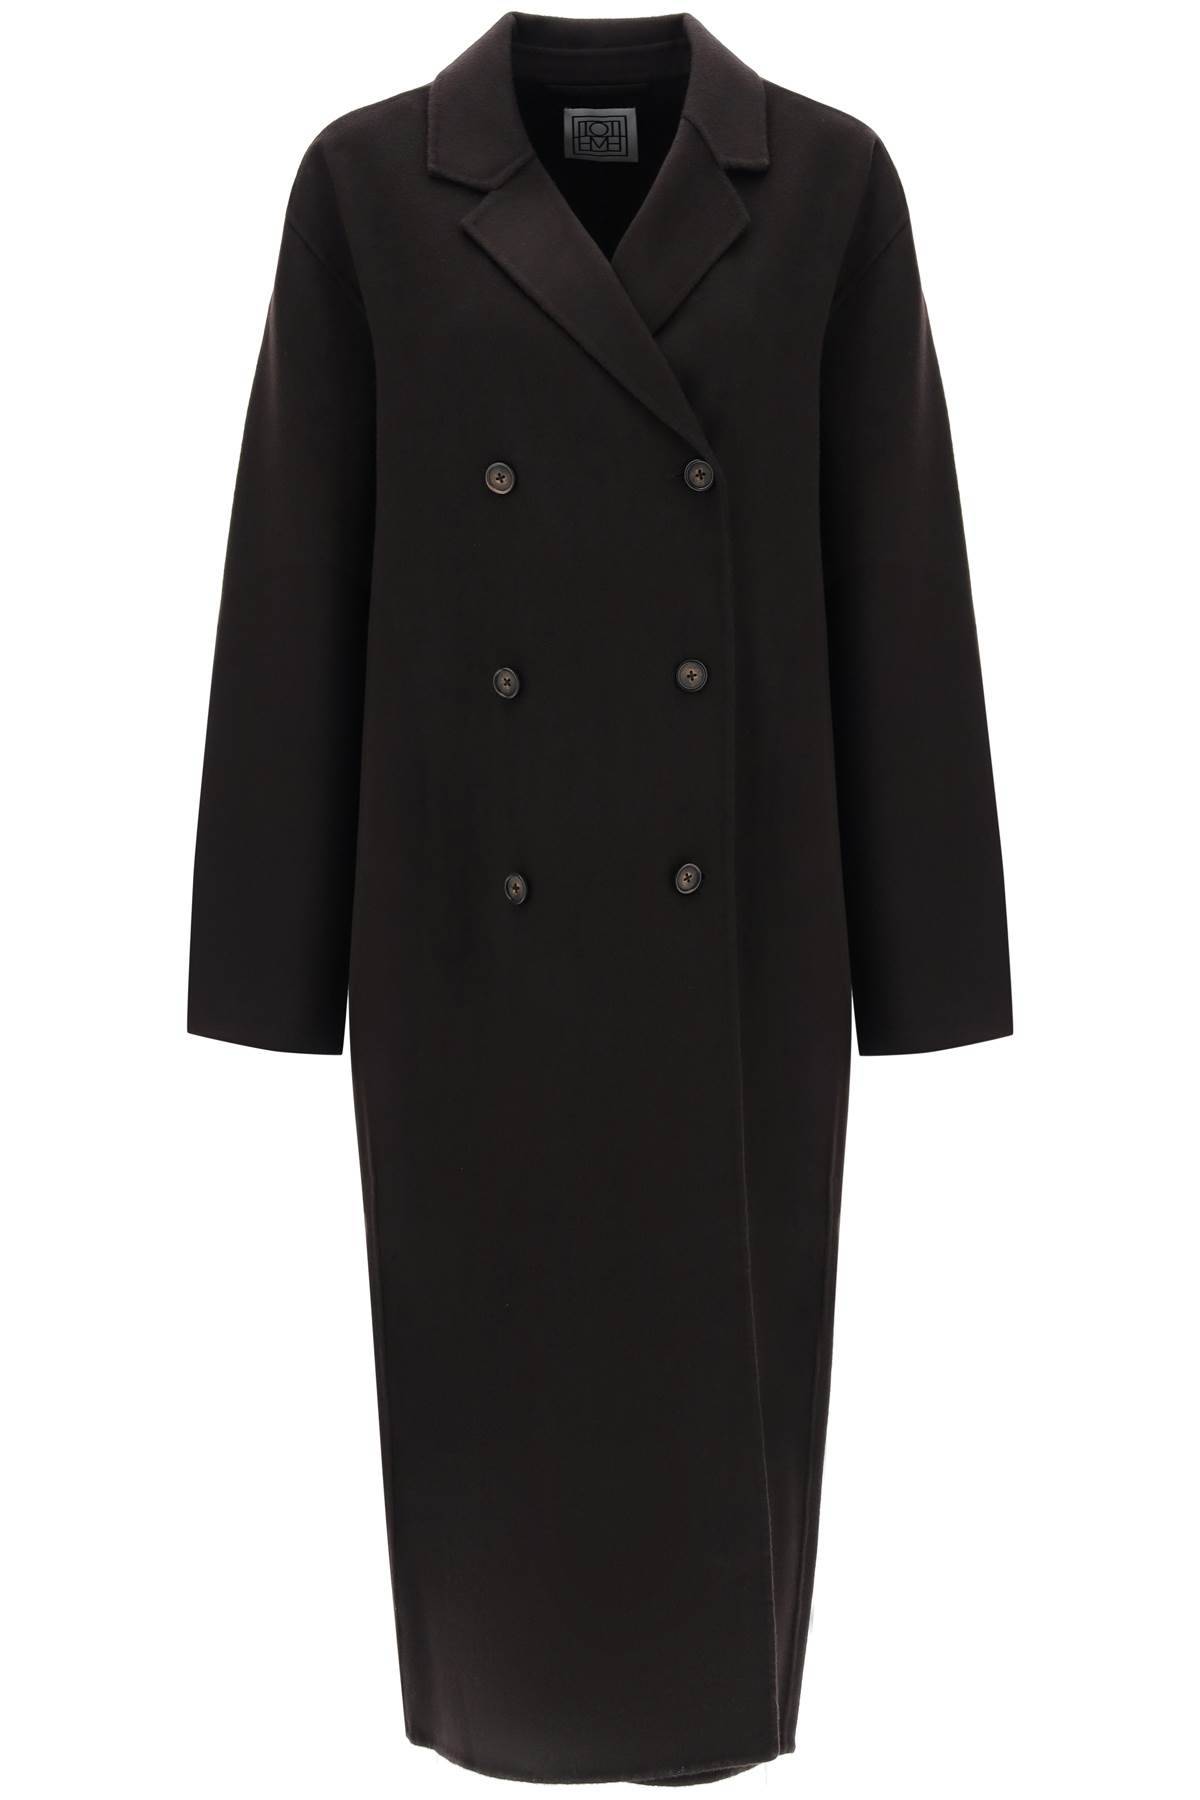 Toteme TOTEME oversized double-breasted wool coat